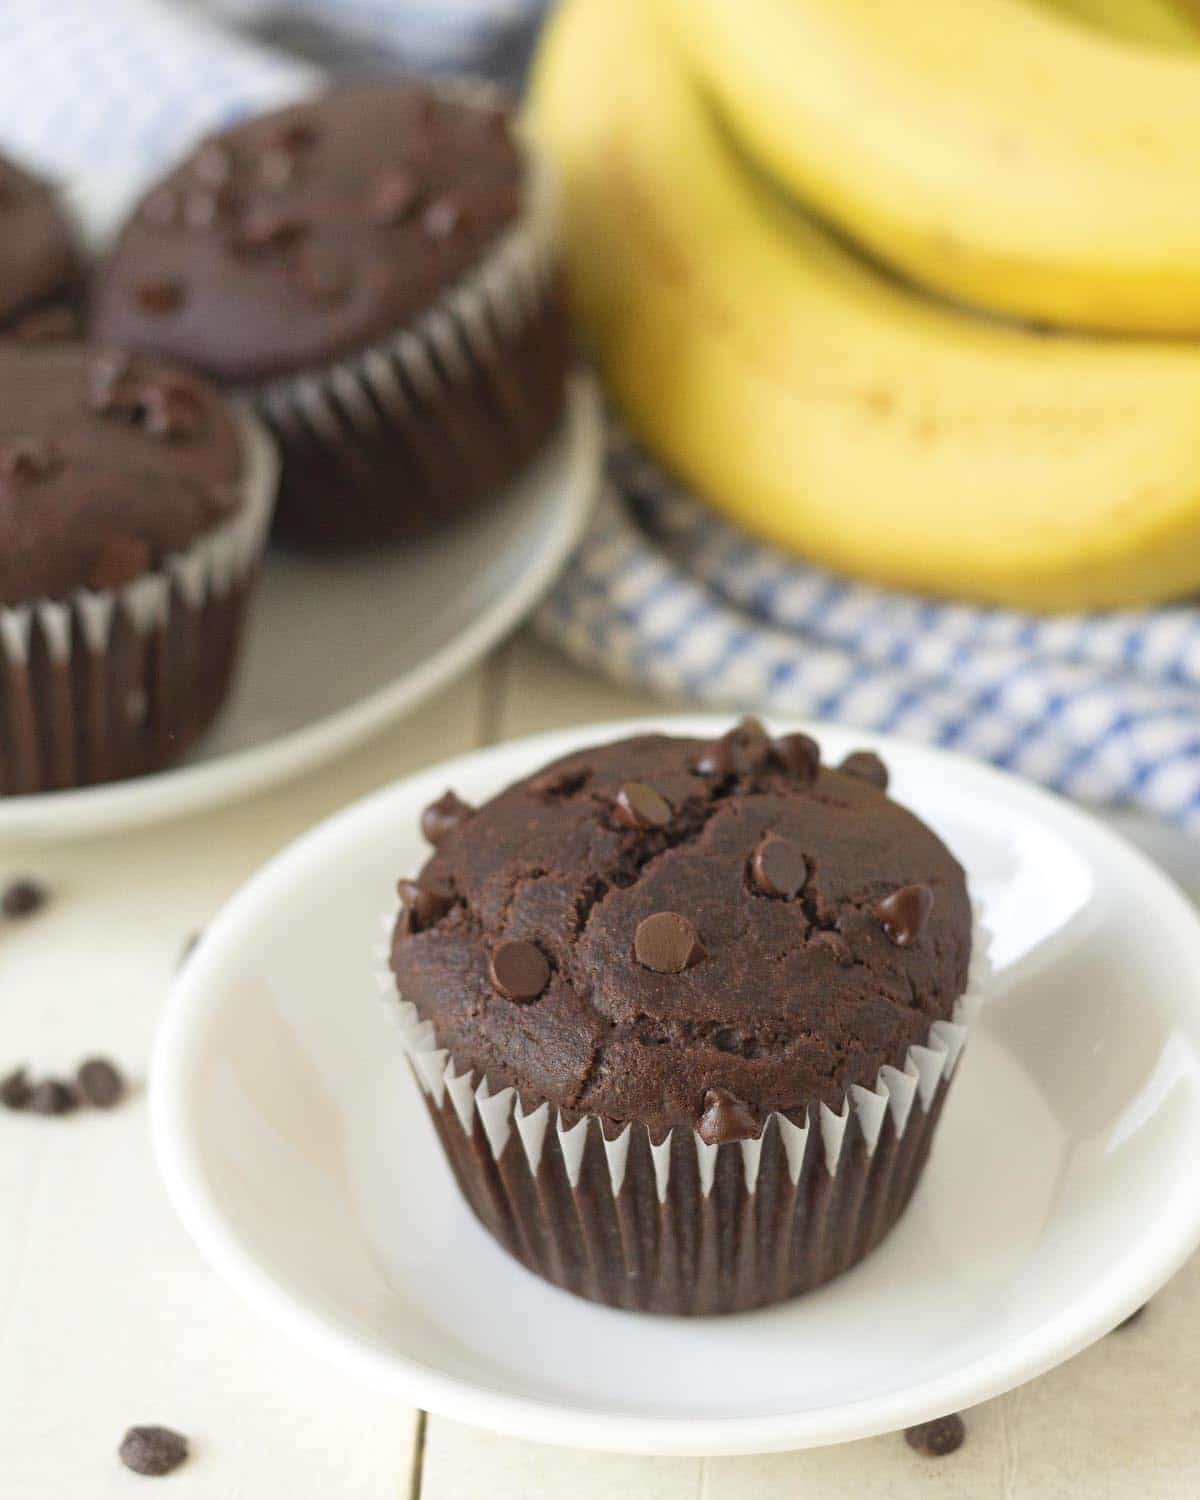 A gluten-free double chocolate banana muffin on a small white plate.